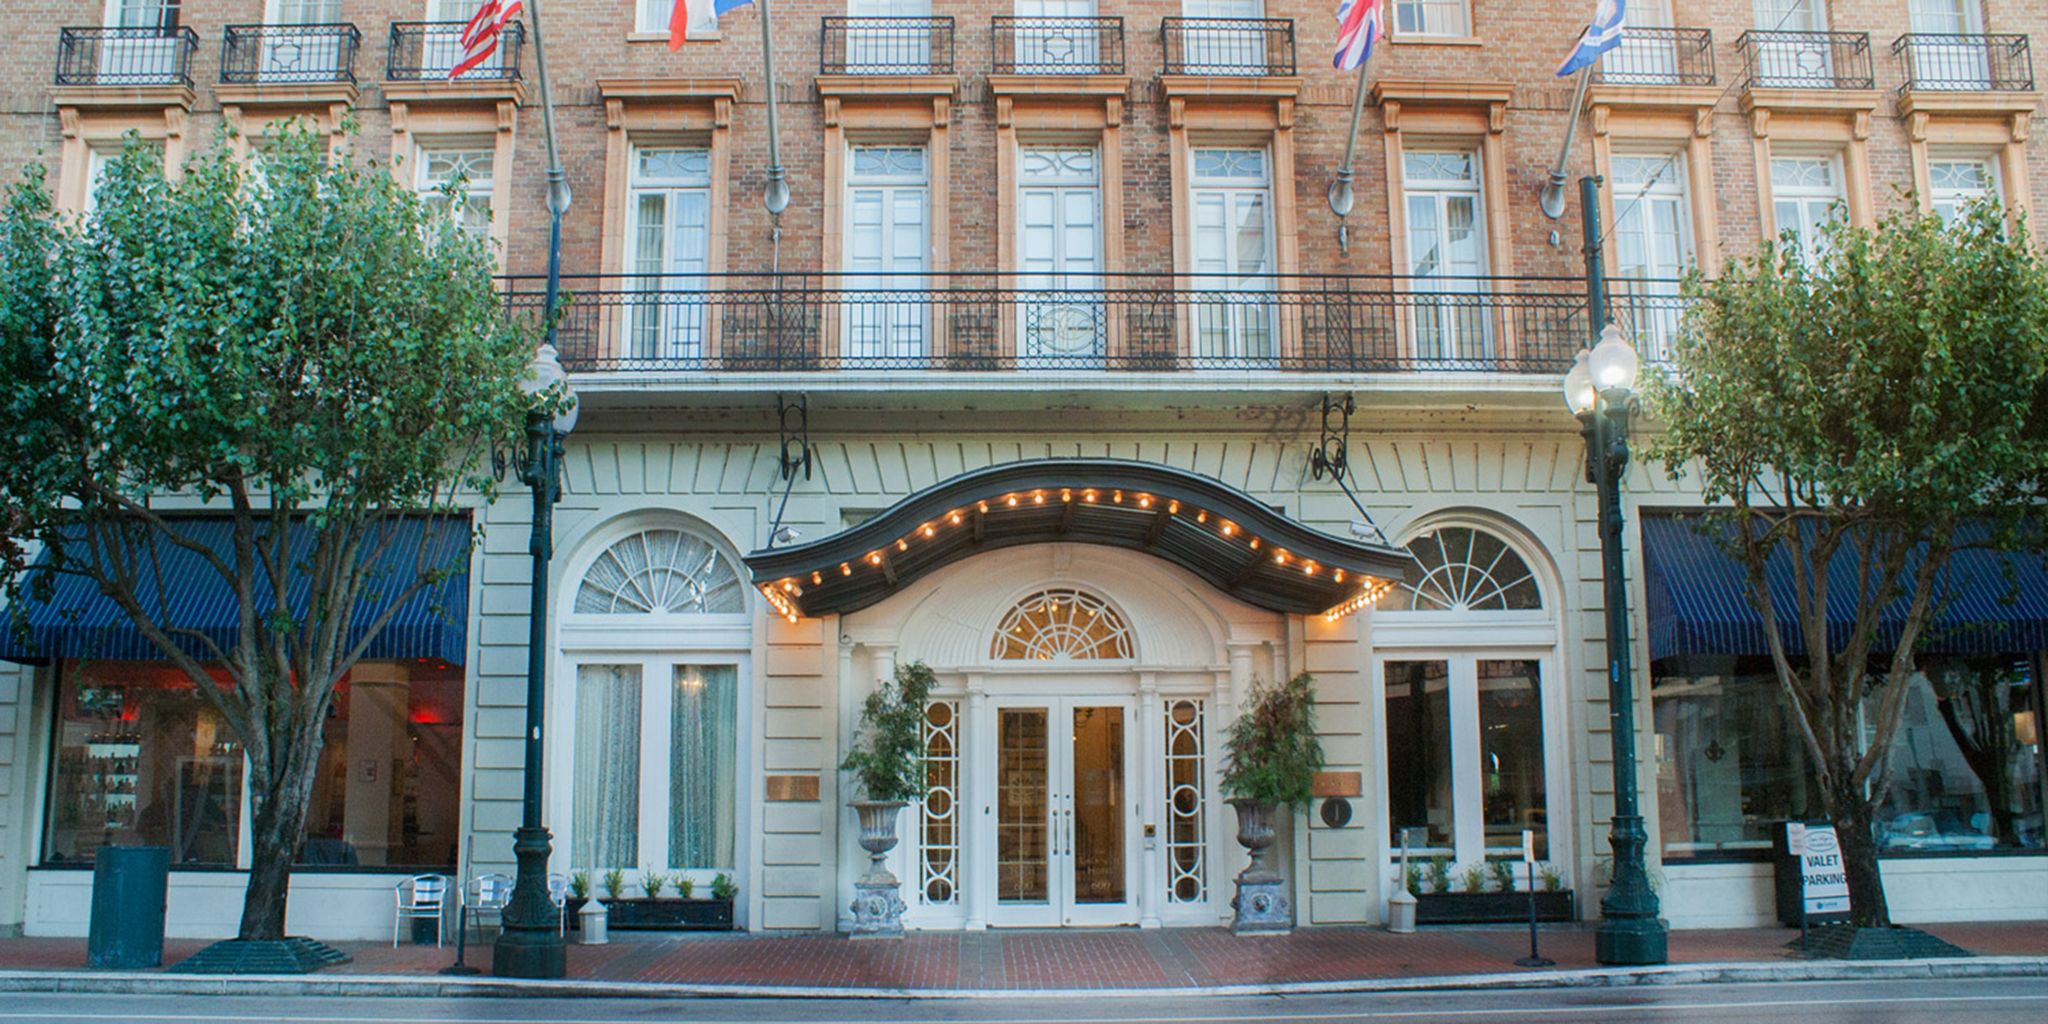 The Lafayette Hotel in New Orleans, Louisiana